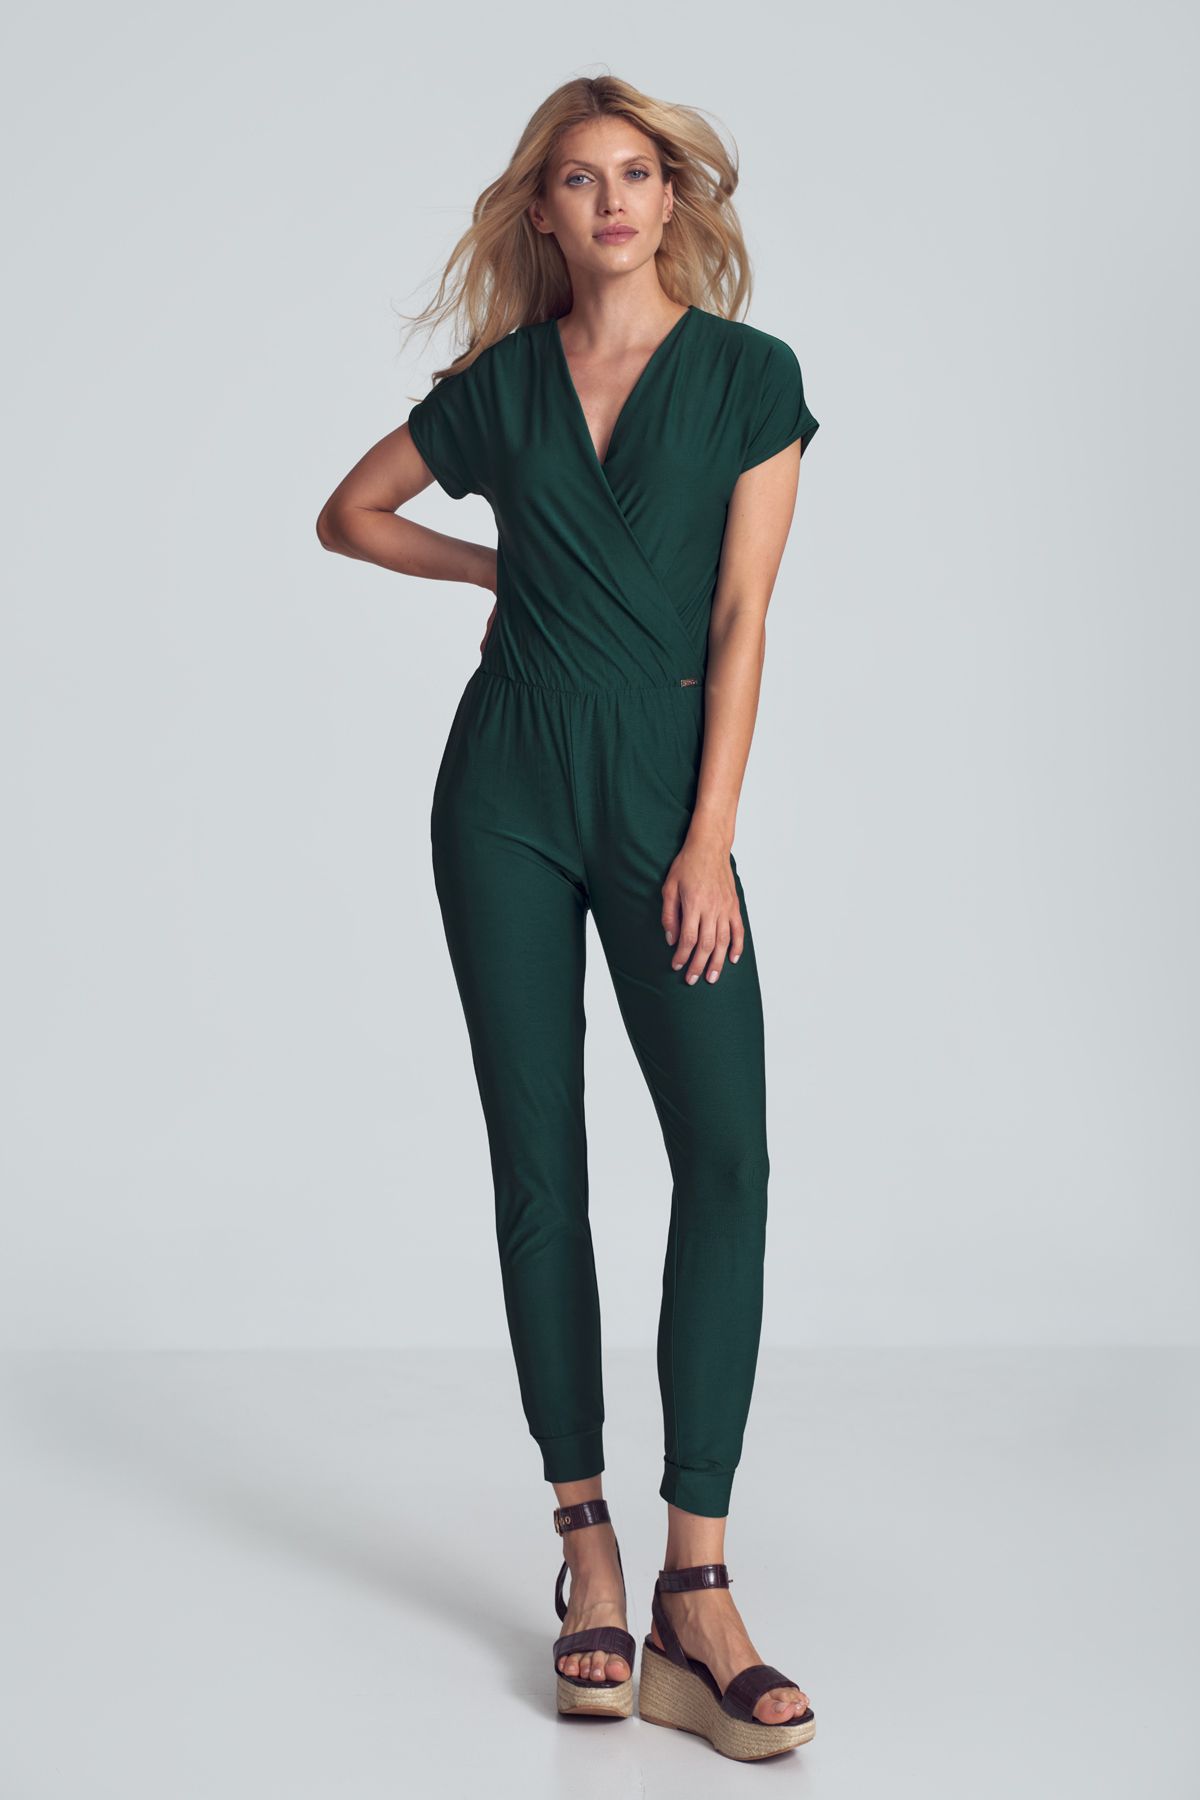 Zielony jumpsuit with a sporty cut, wrinkled neckline, an elastic band sewn at the waist, narrow legs finished with a welt. Pockets in the side seams.